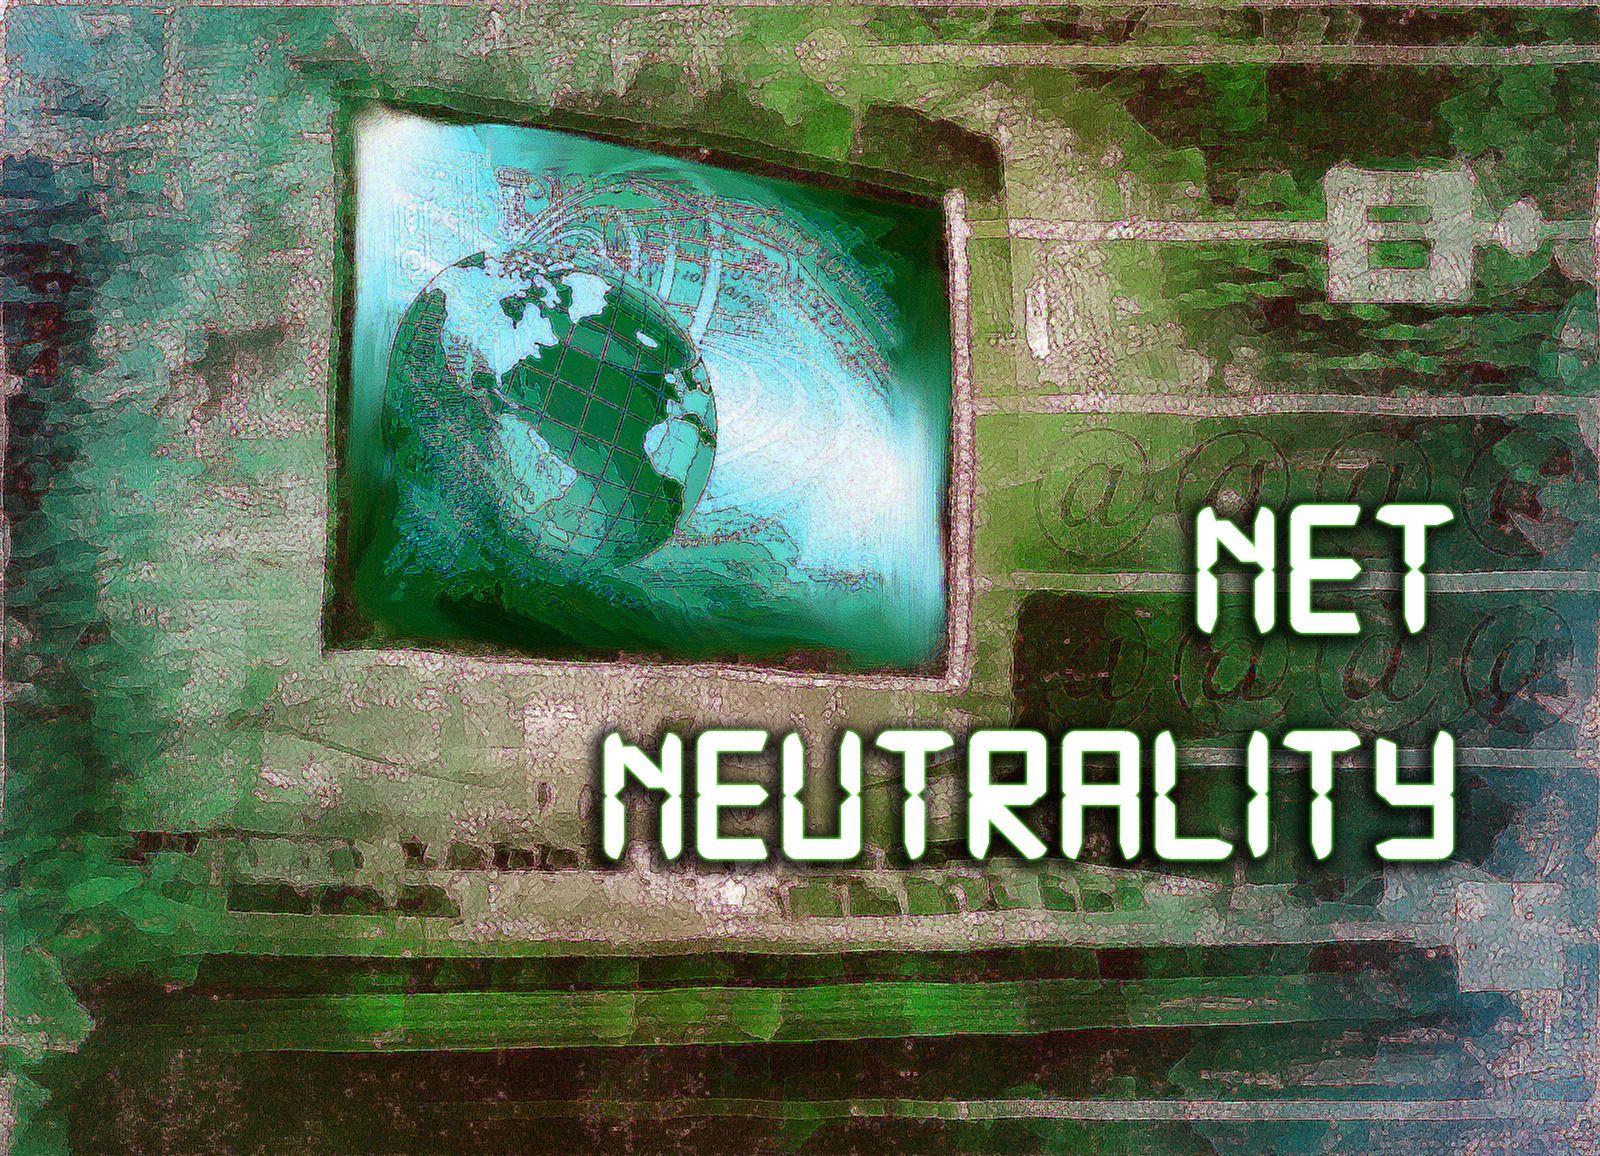 Old FCC Logo - FCC asks whether to 'keep, modify, or eliminate' net neutrality